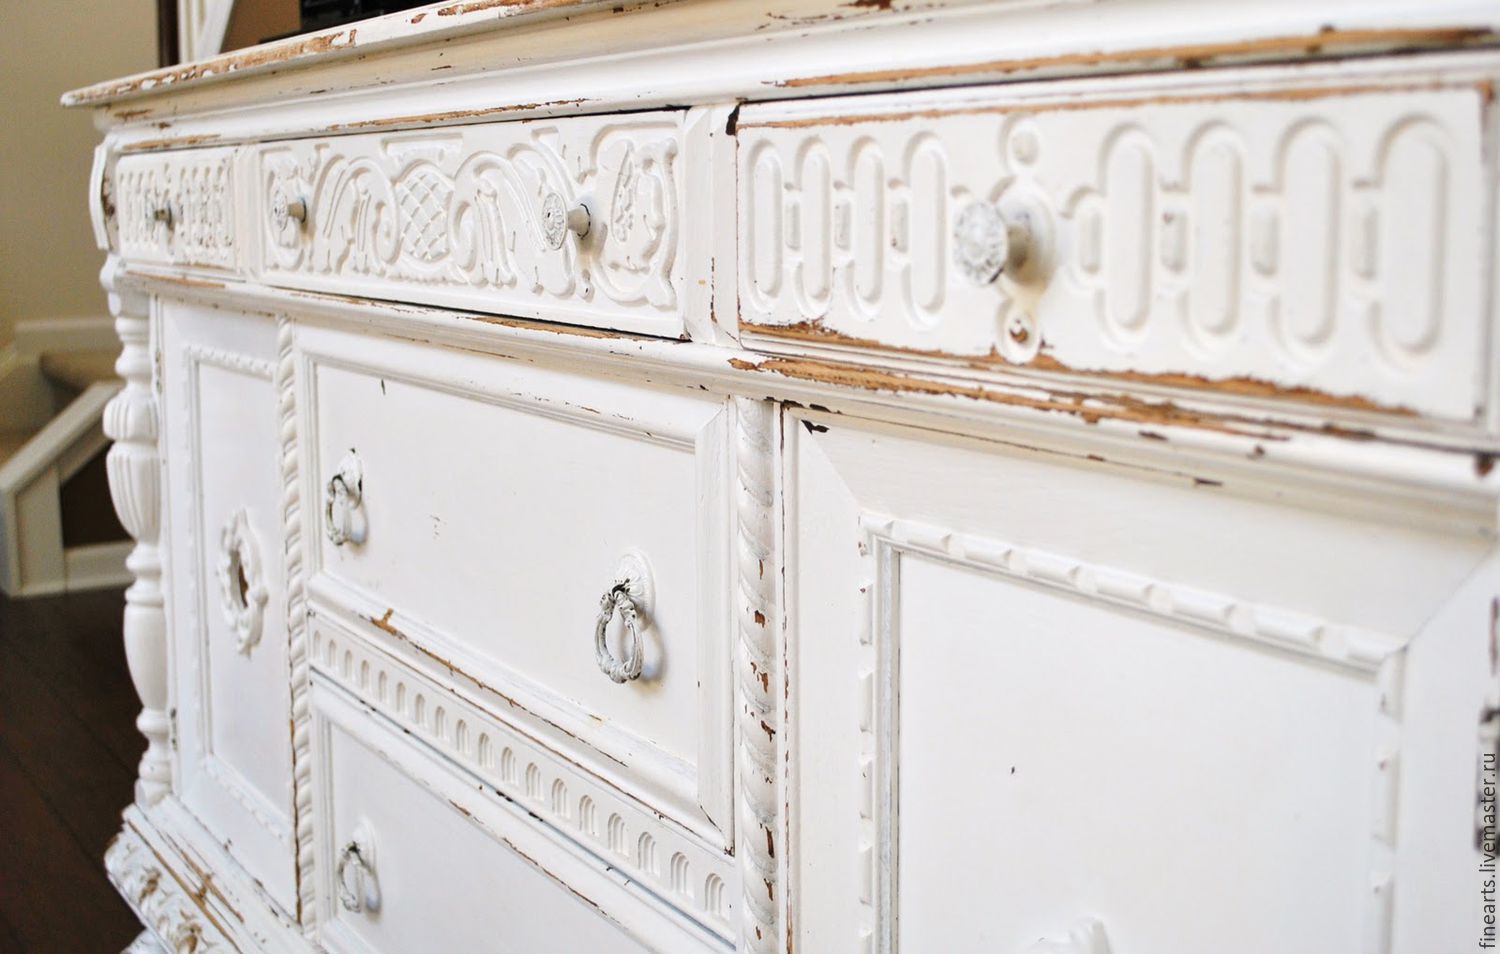 aging and decor of furniture